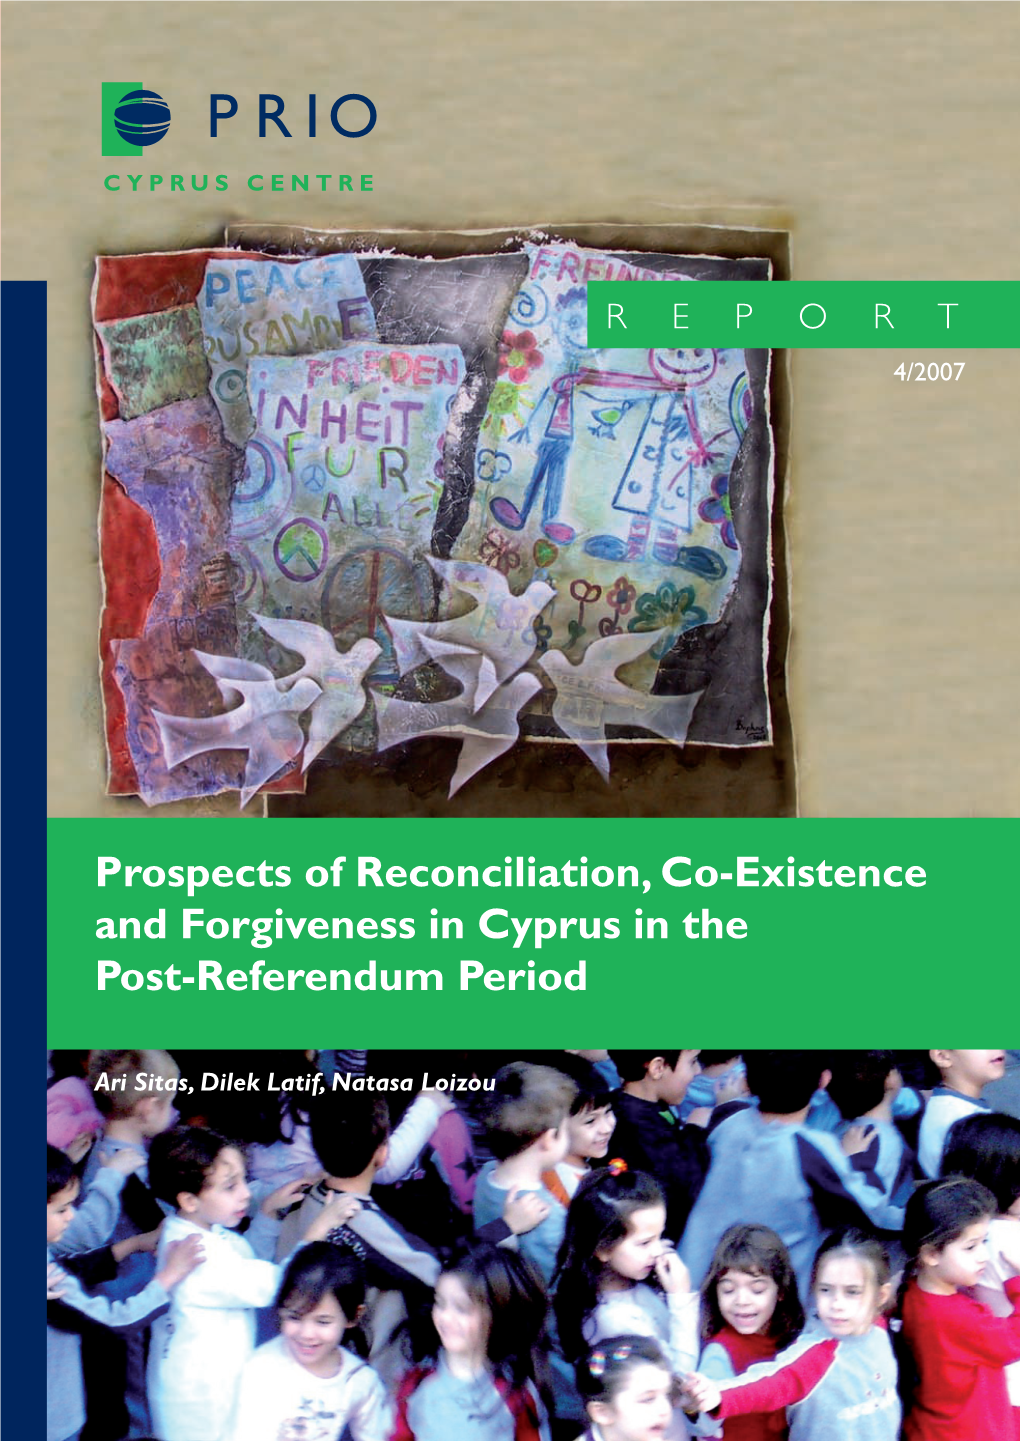 Prospects of Reconciliation, Co-Existence and Forgiveness in Cyprus in the Post-Referendum Period